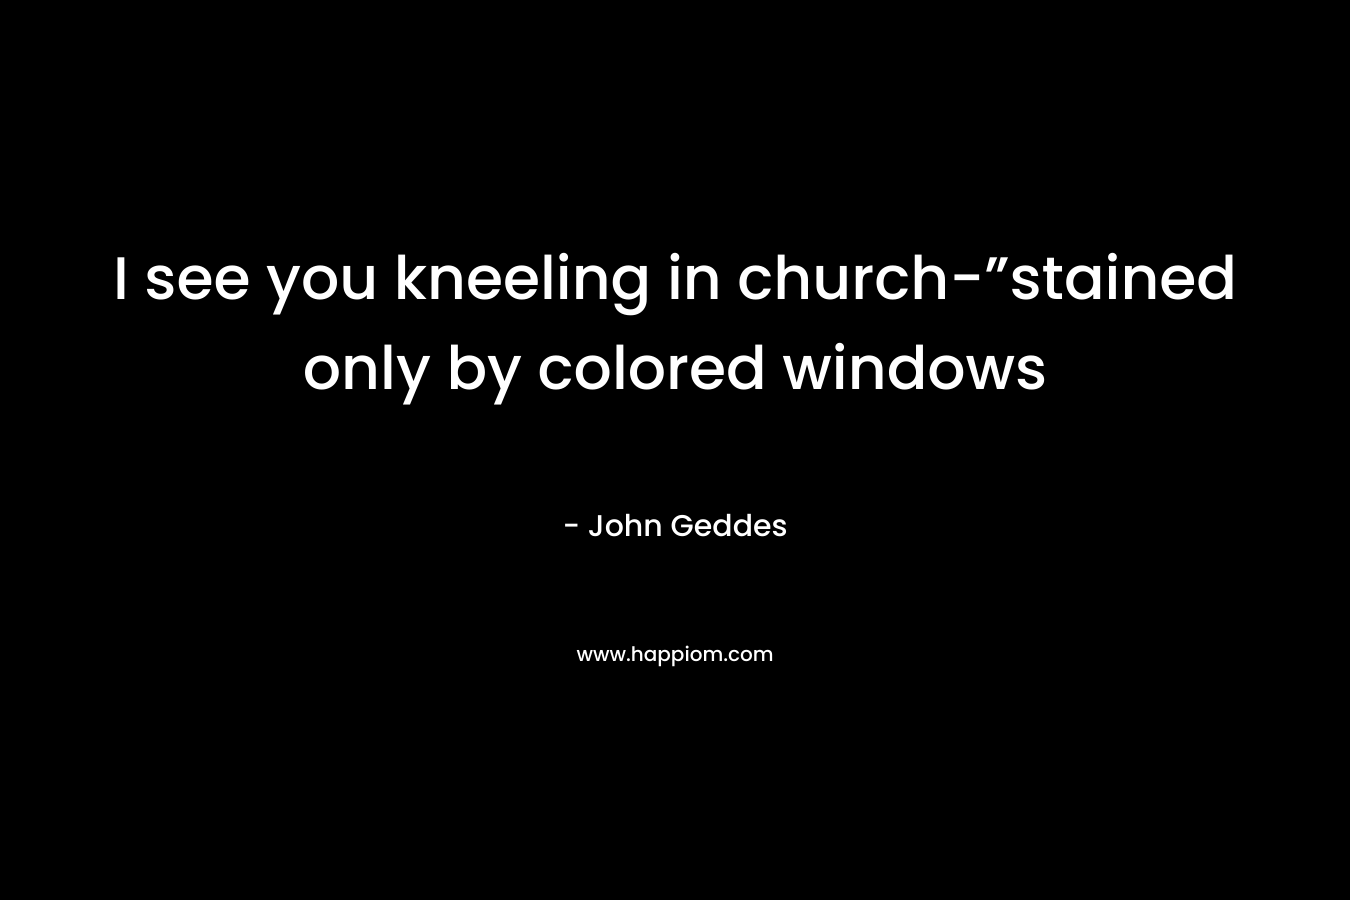 I see you kneeling in church-”stained only by colored windows – John Geddes